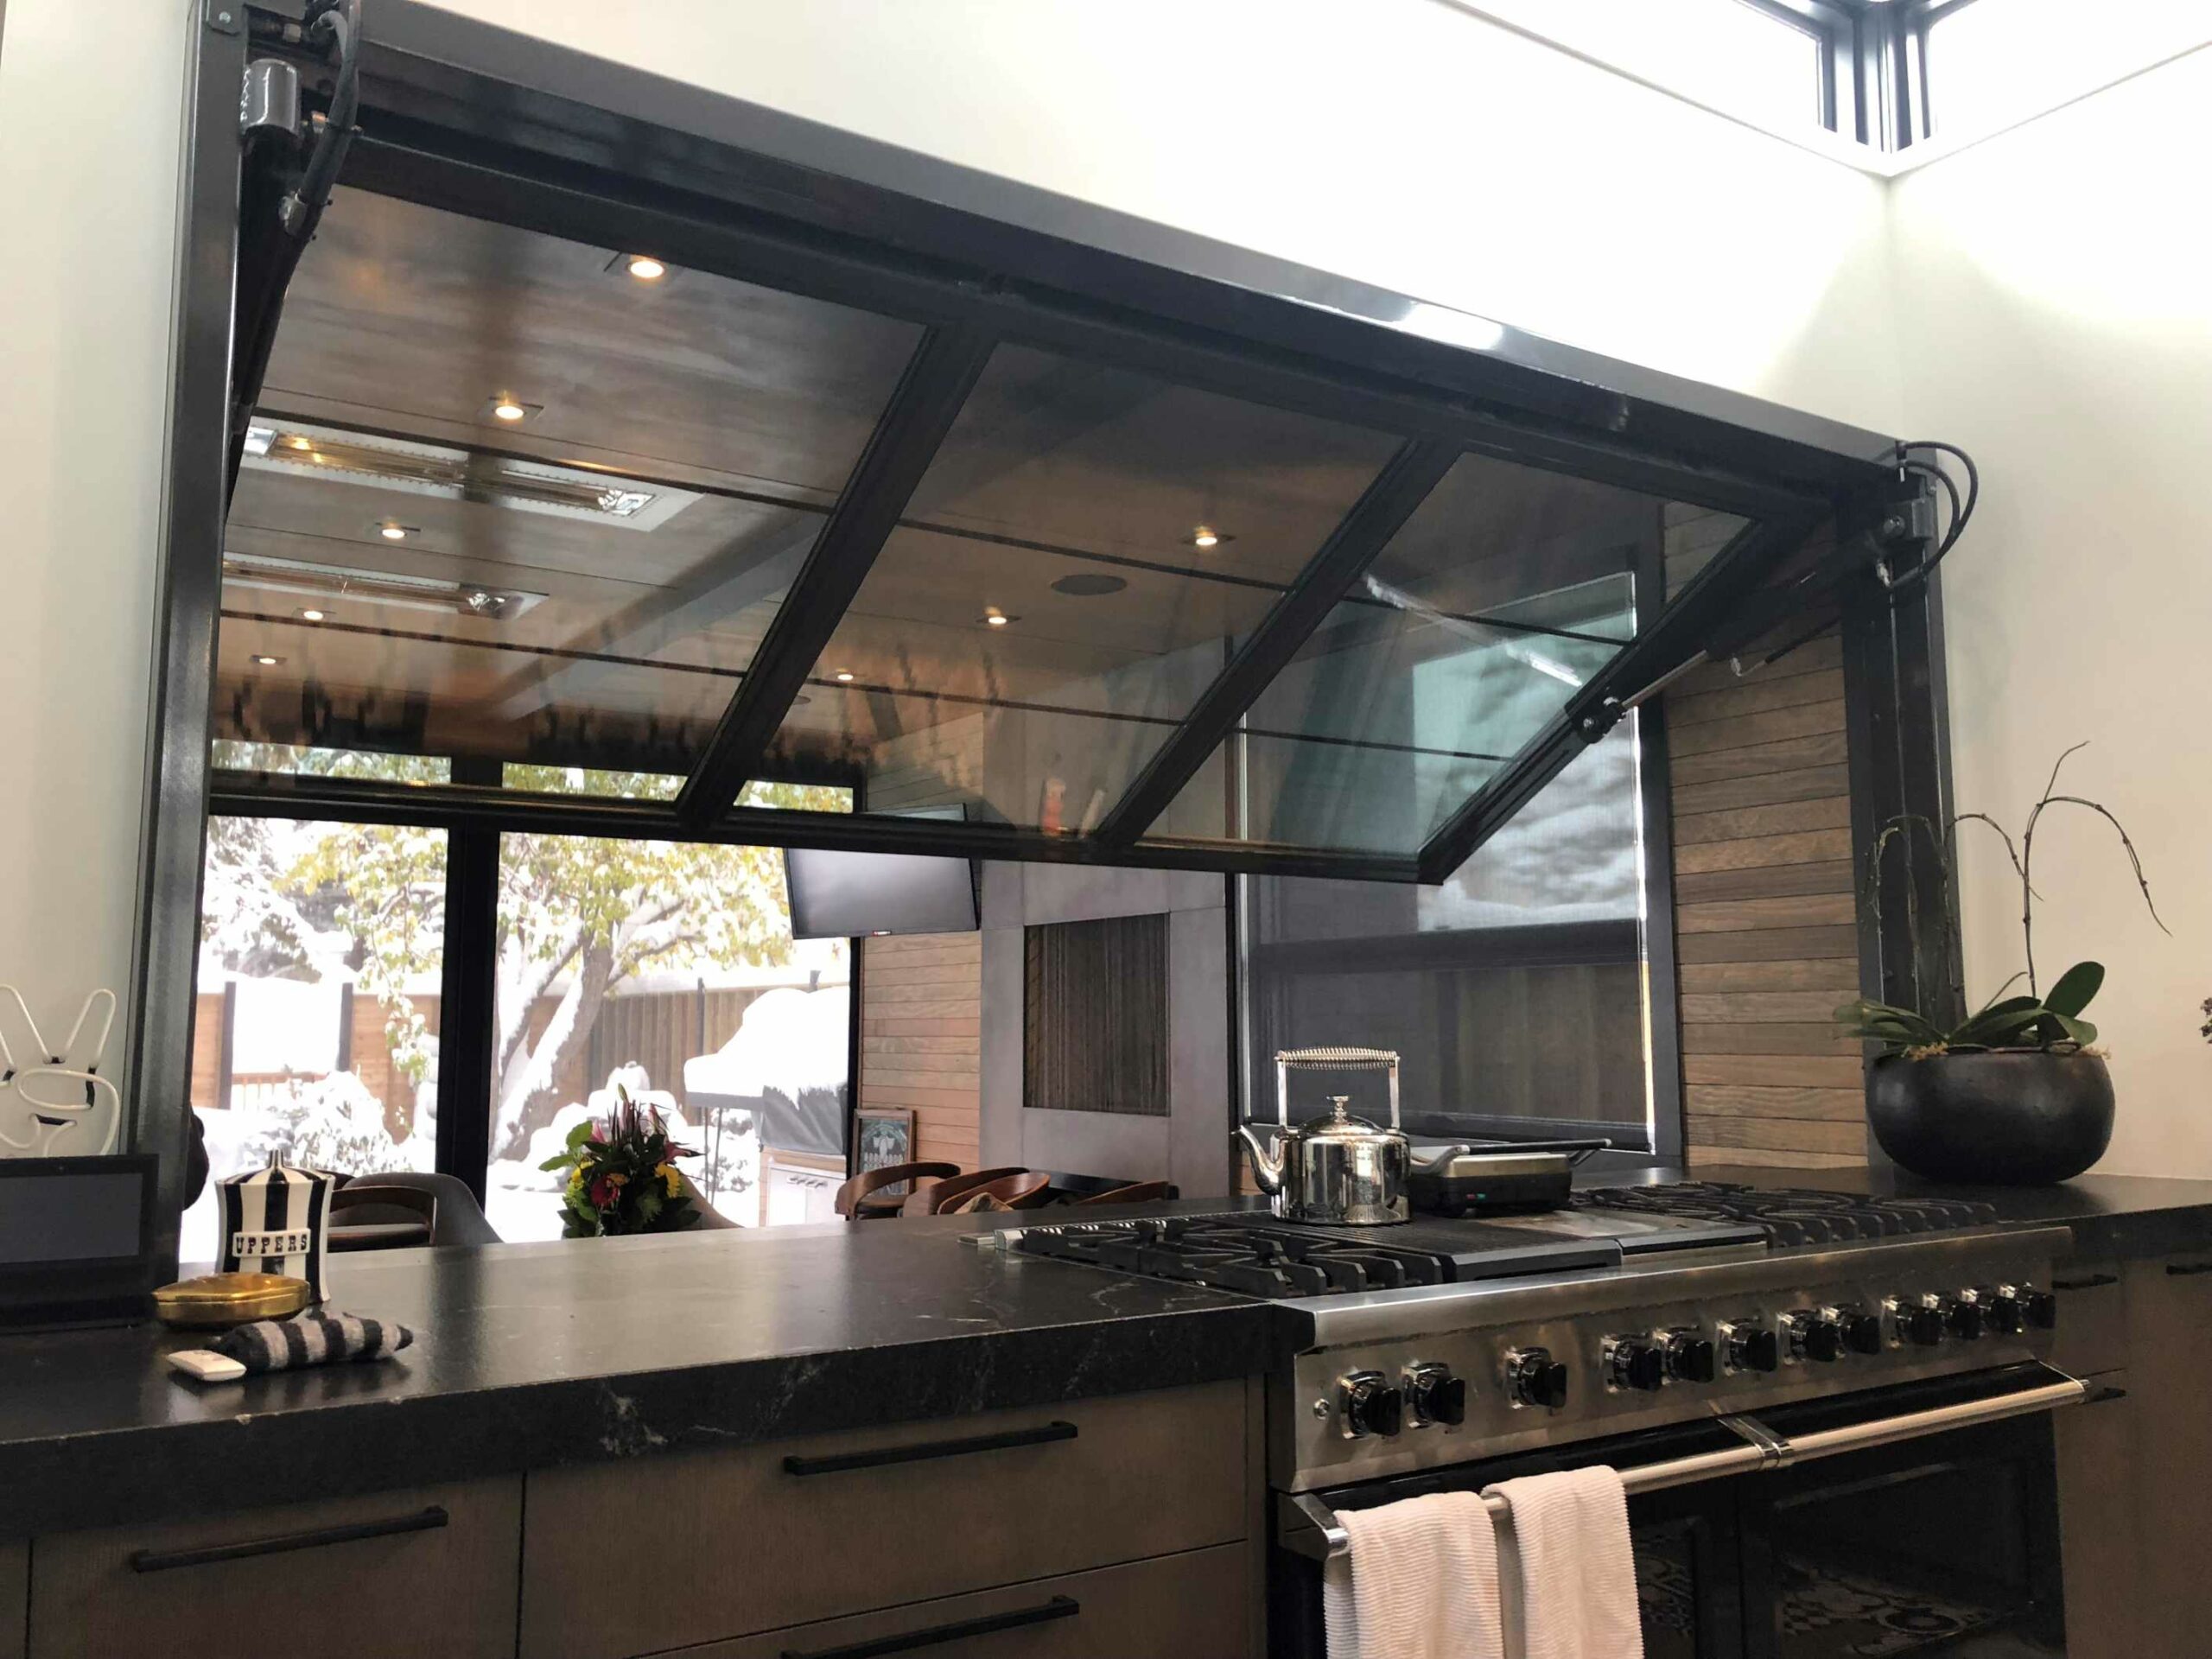 Kitchen to patio 12' x 6' PLift glass wall 1 Oct 18